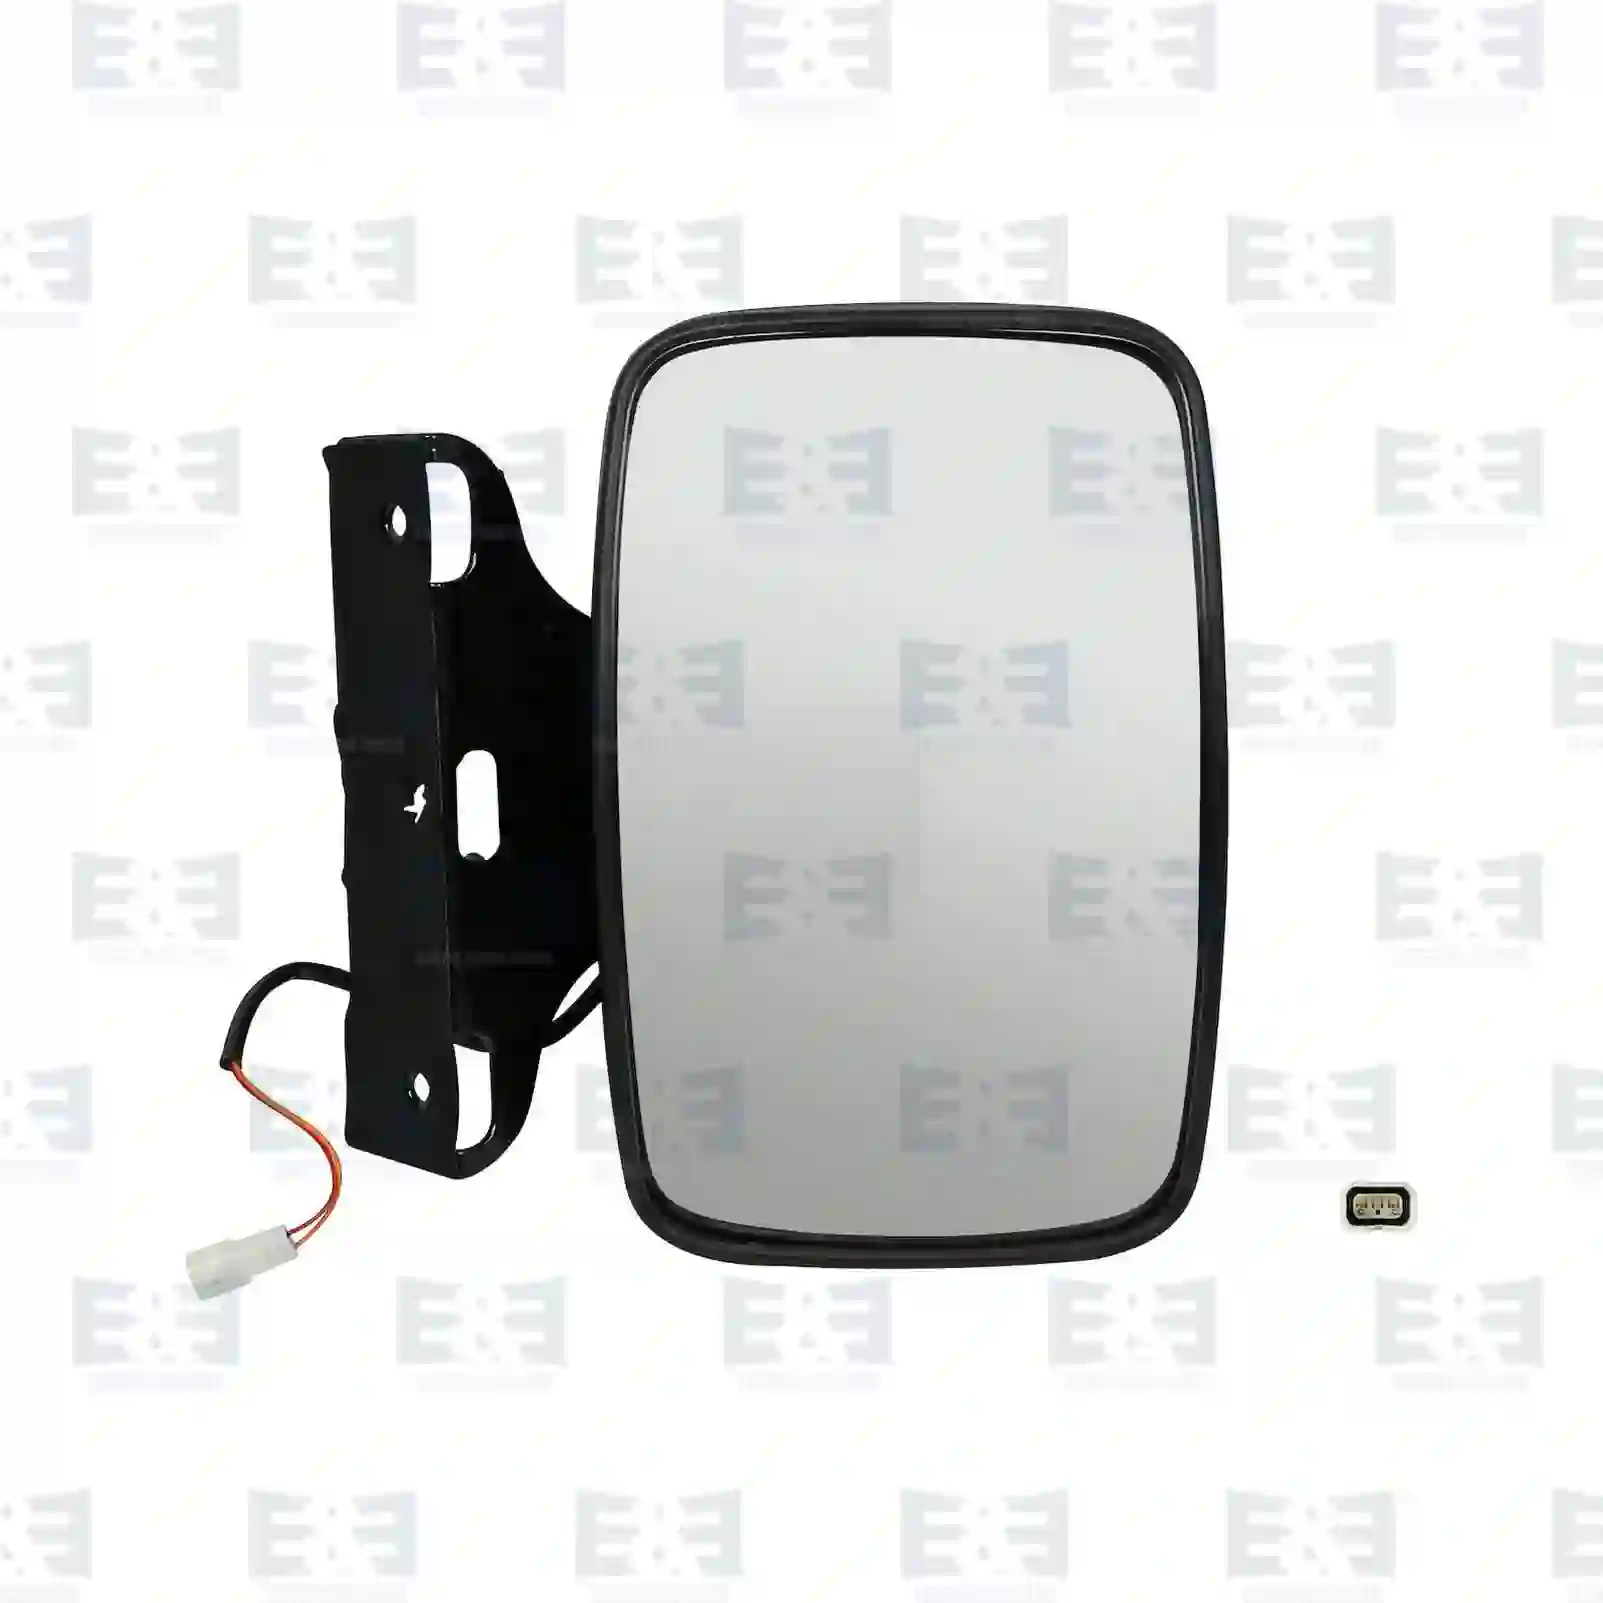  Kerb observation mirror, heated || E&E Truck Spare Parts | Truck Spare Parts, Auotomotive Spare Parts